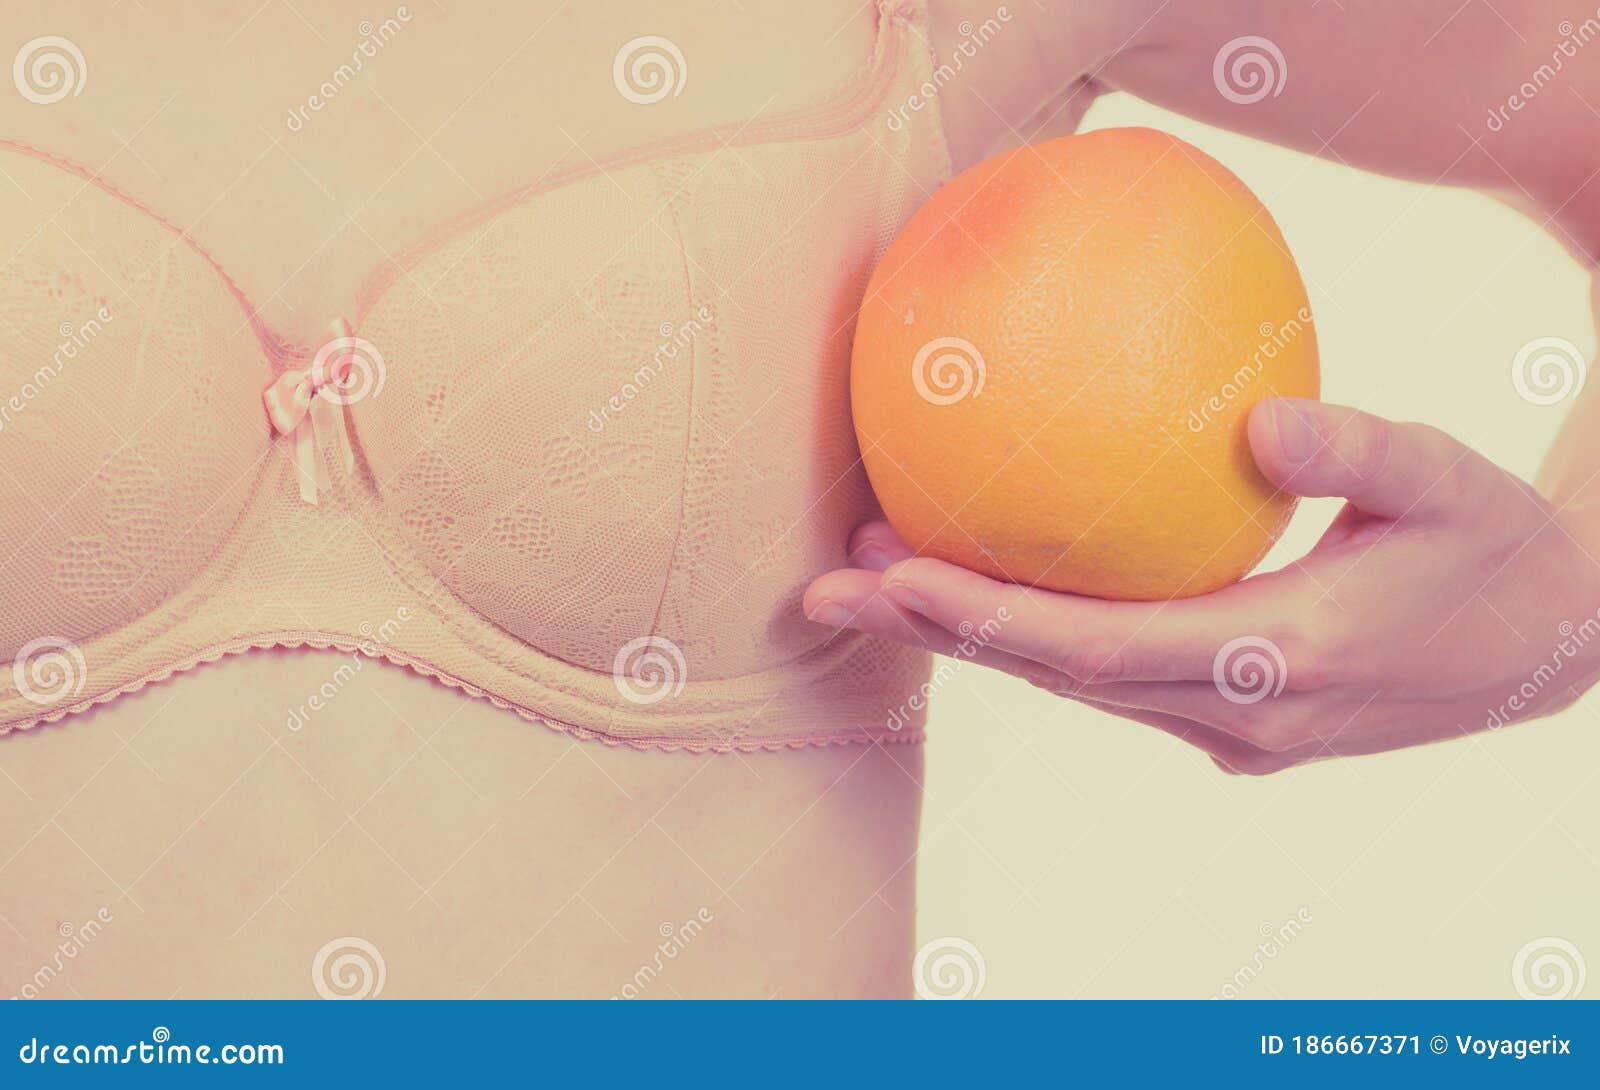 Slim Young Woman Small Boobs Puts Big Orange Fruit In Her Bra. Breast  Enlargement Size Correction Concept. Stock Photo, Picture and Royalty Free  Image. Image 143825659.